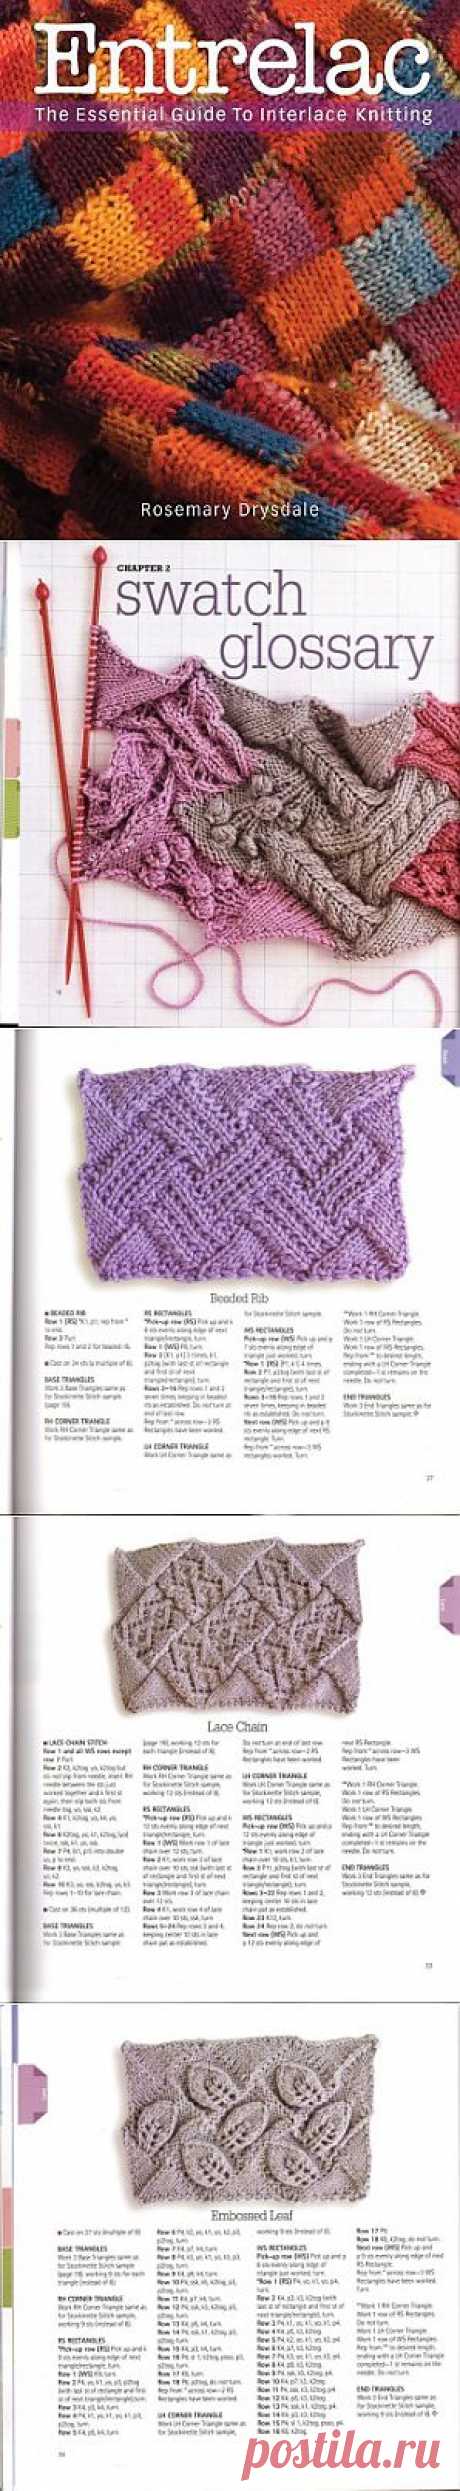 Entrelac: The Essential Guide to Interlace Knitting.